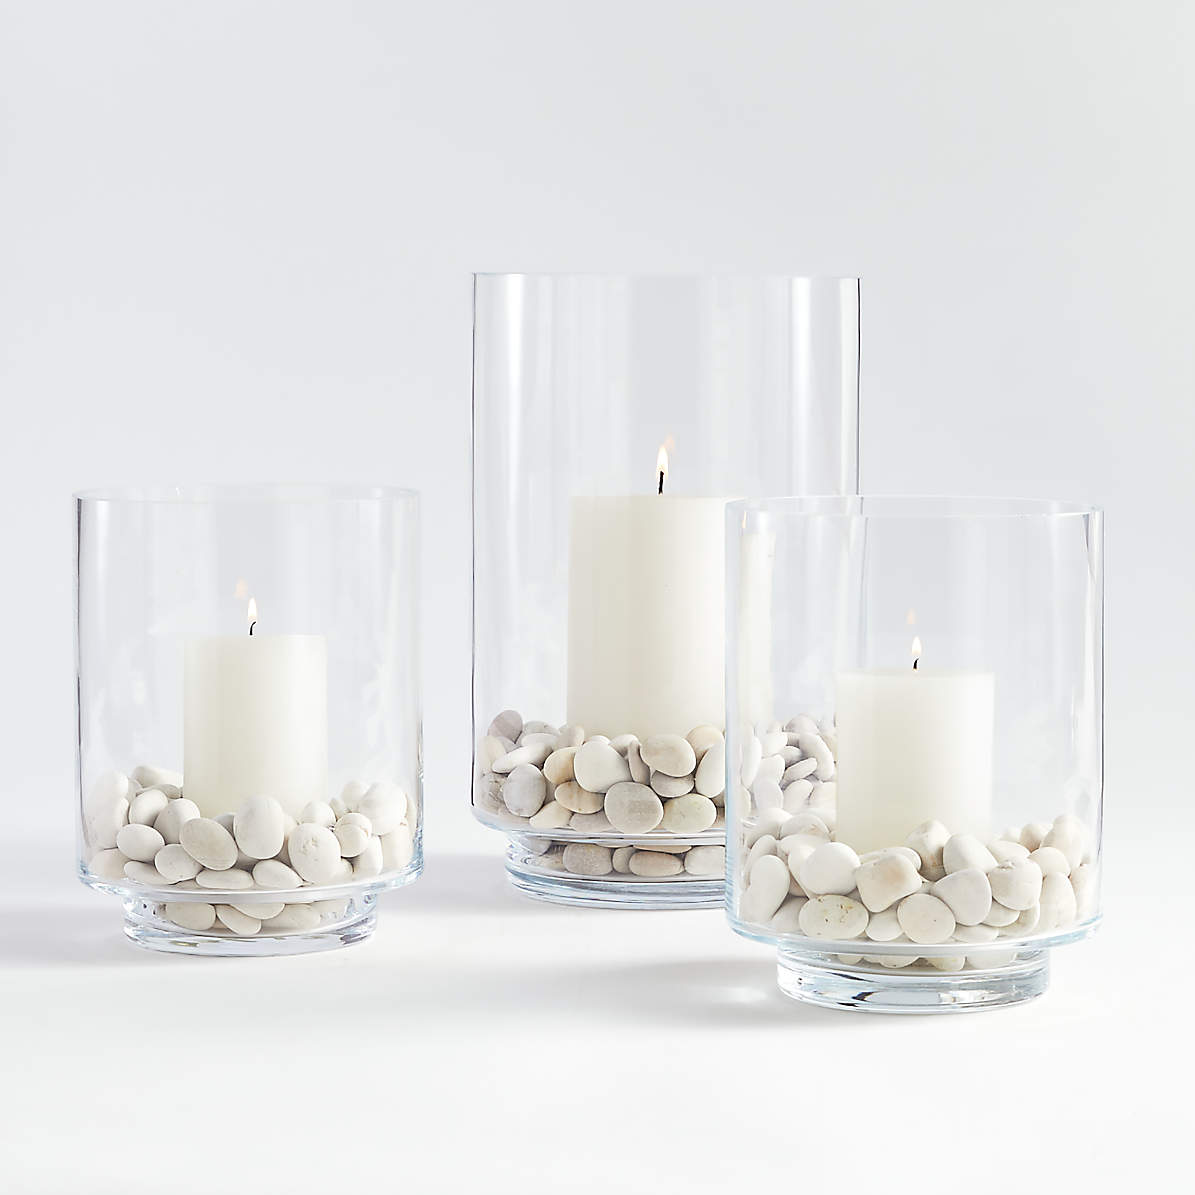 Candle-lite Valentine's Day 50 ct Unscented White Tea Light